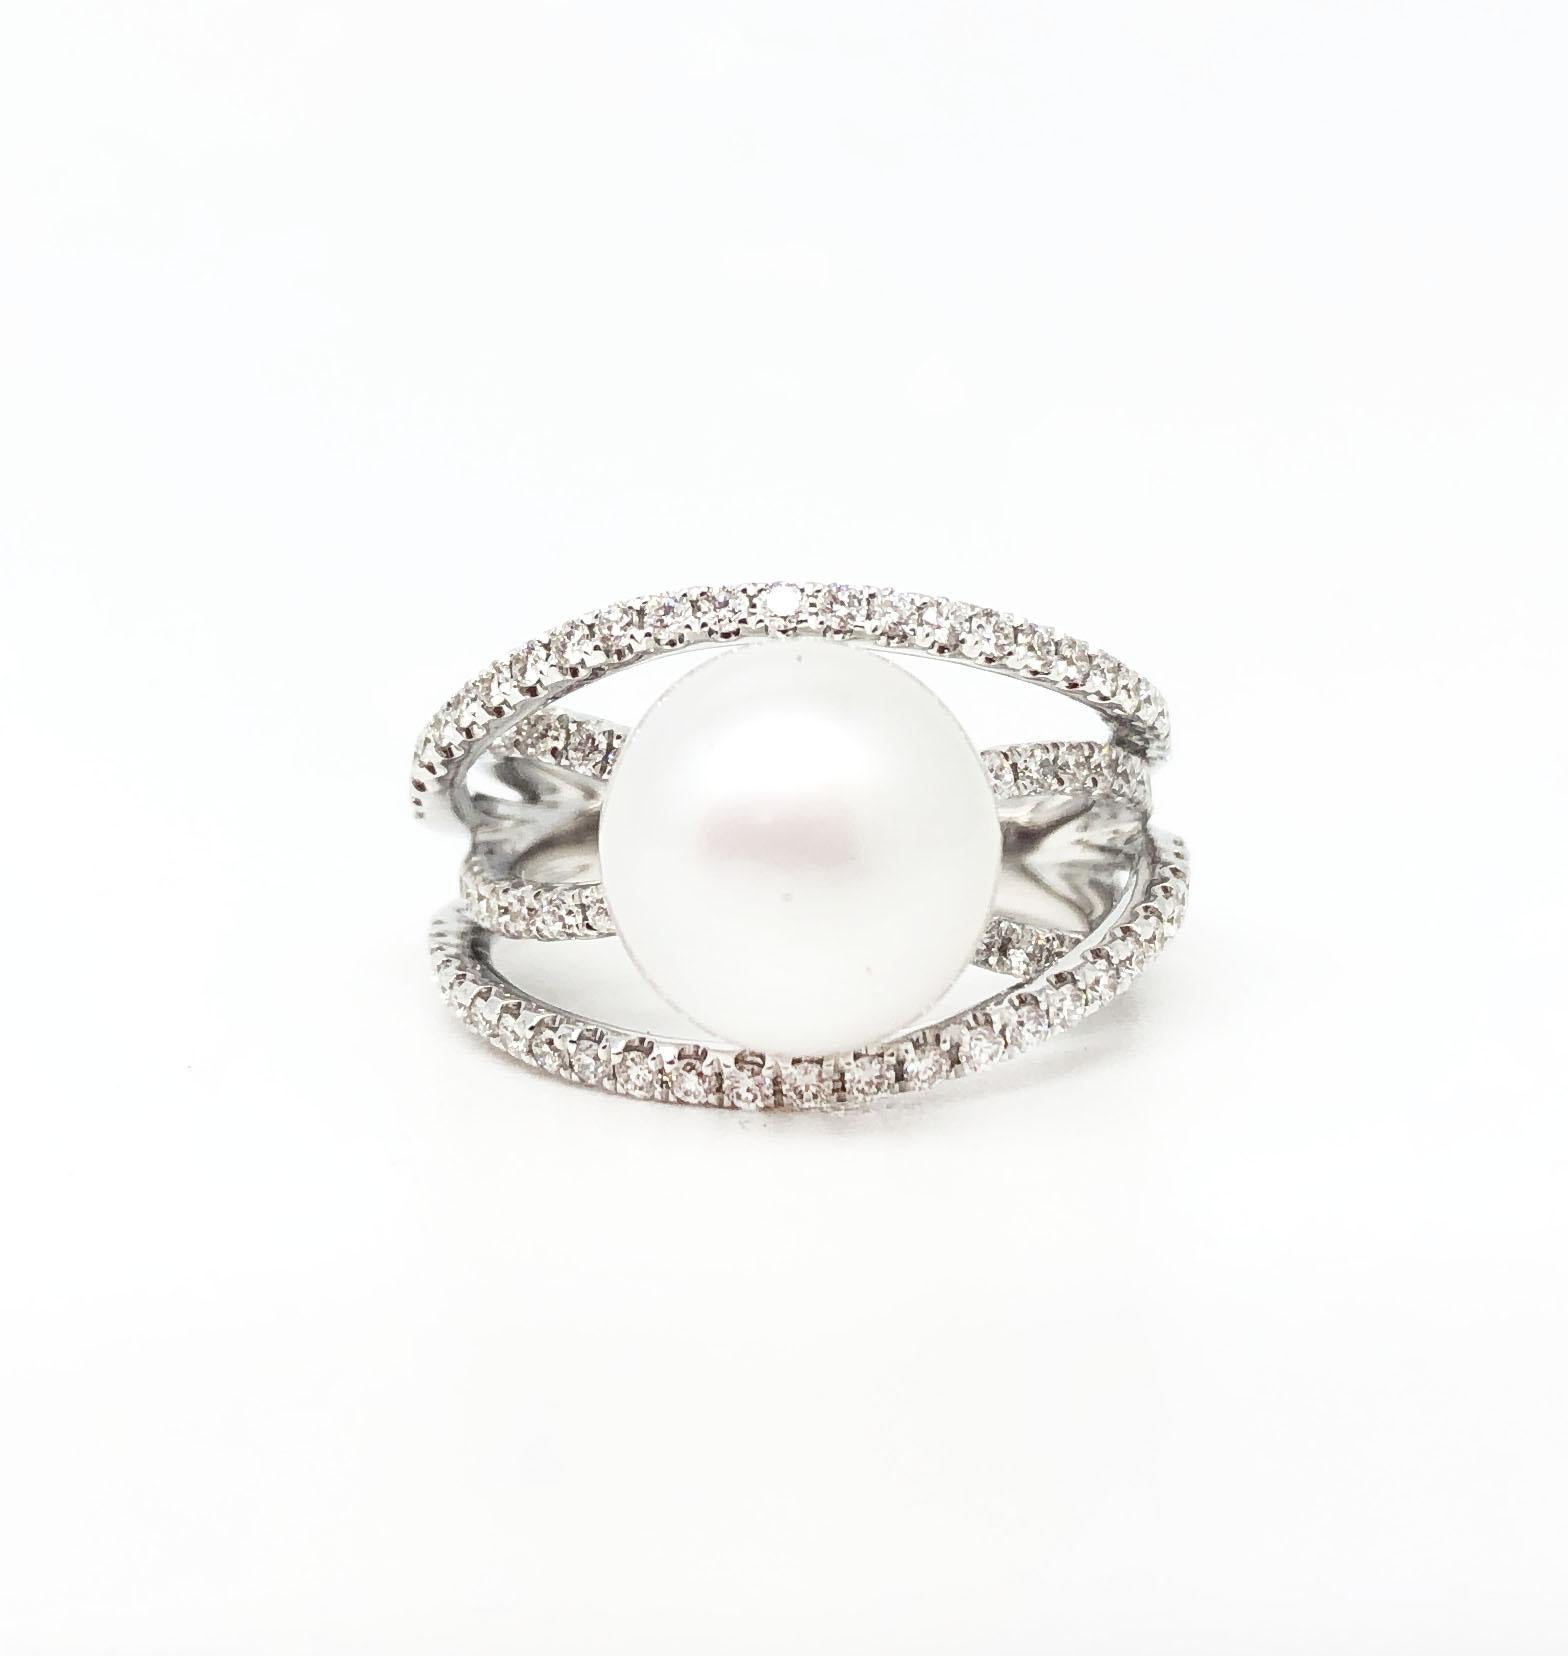 This lovely ring features a beautiful 10mm White Southsea Pearl in good luster and the nearly round shape, accompanied by 0.77 Carat diamonds. The design is suitable for your everyday wear. 

The ring is made in 18K White Gold and ring size is US